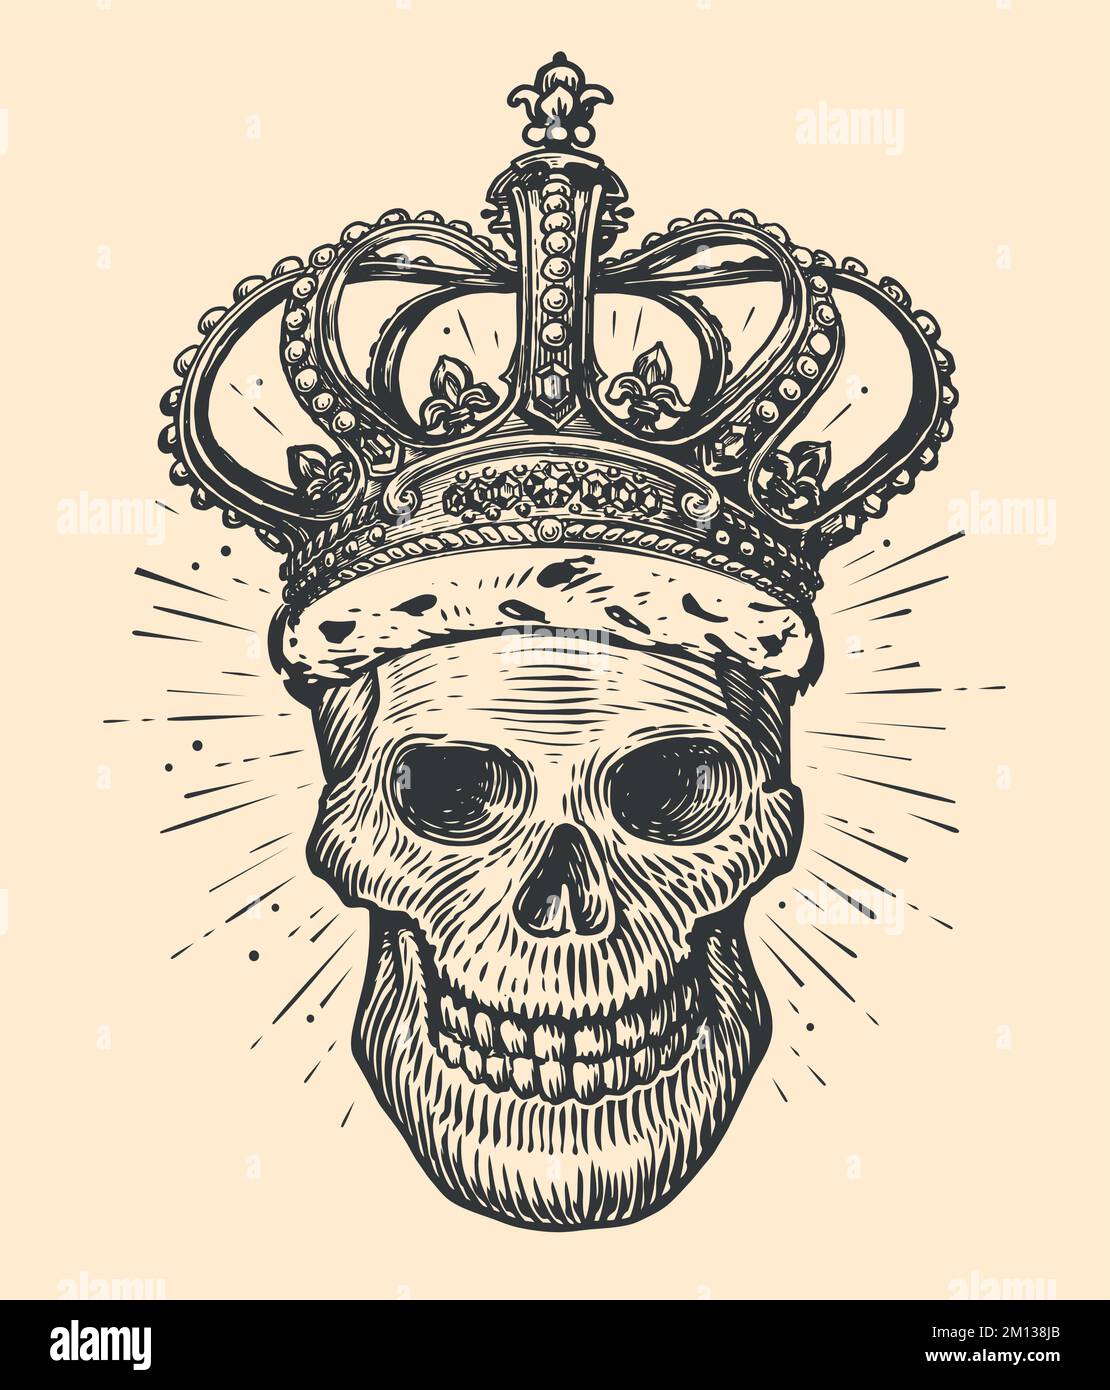 15+ Powerful King Tattoo Designs for Strength and Authority! | King tattoos,  Tattoos for guys, Black tattoos